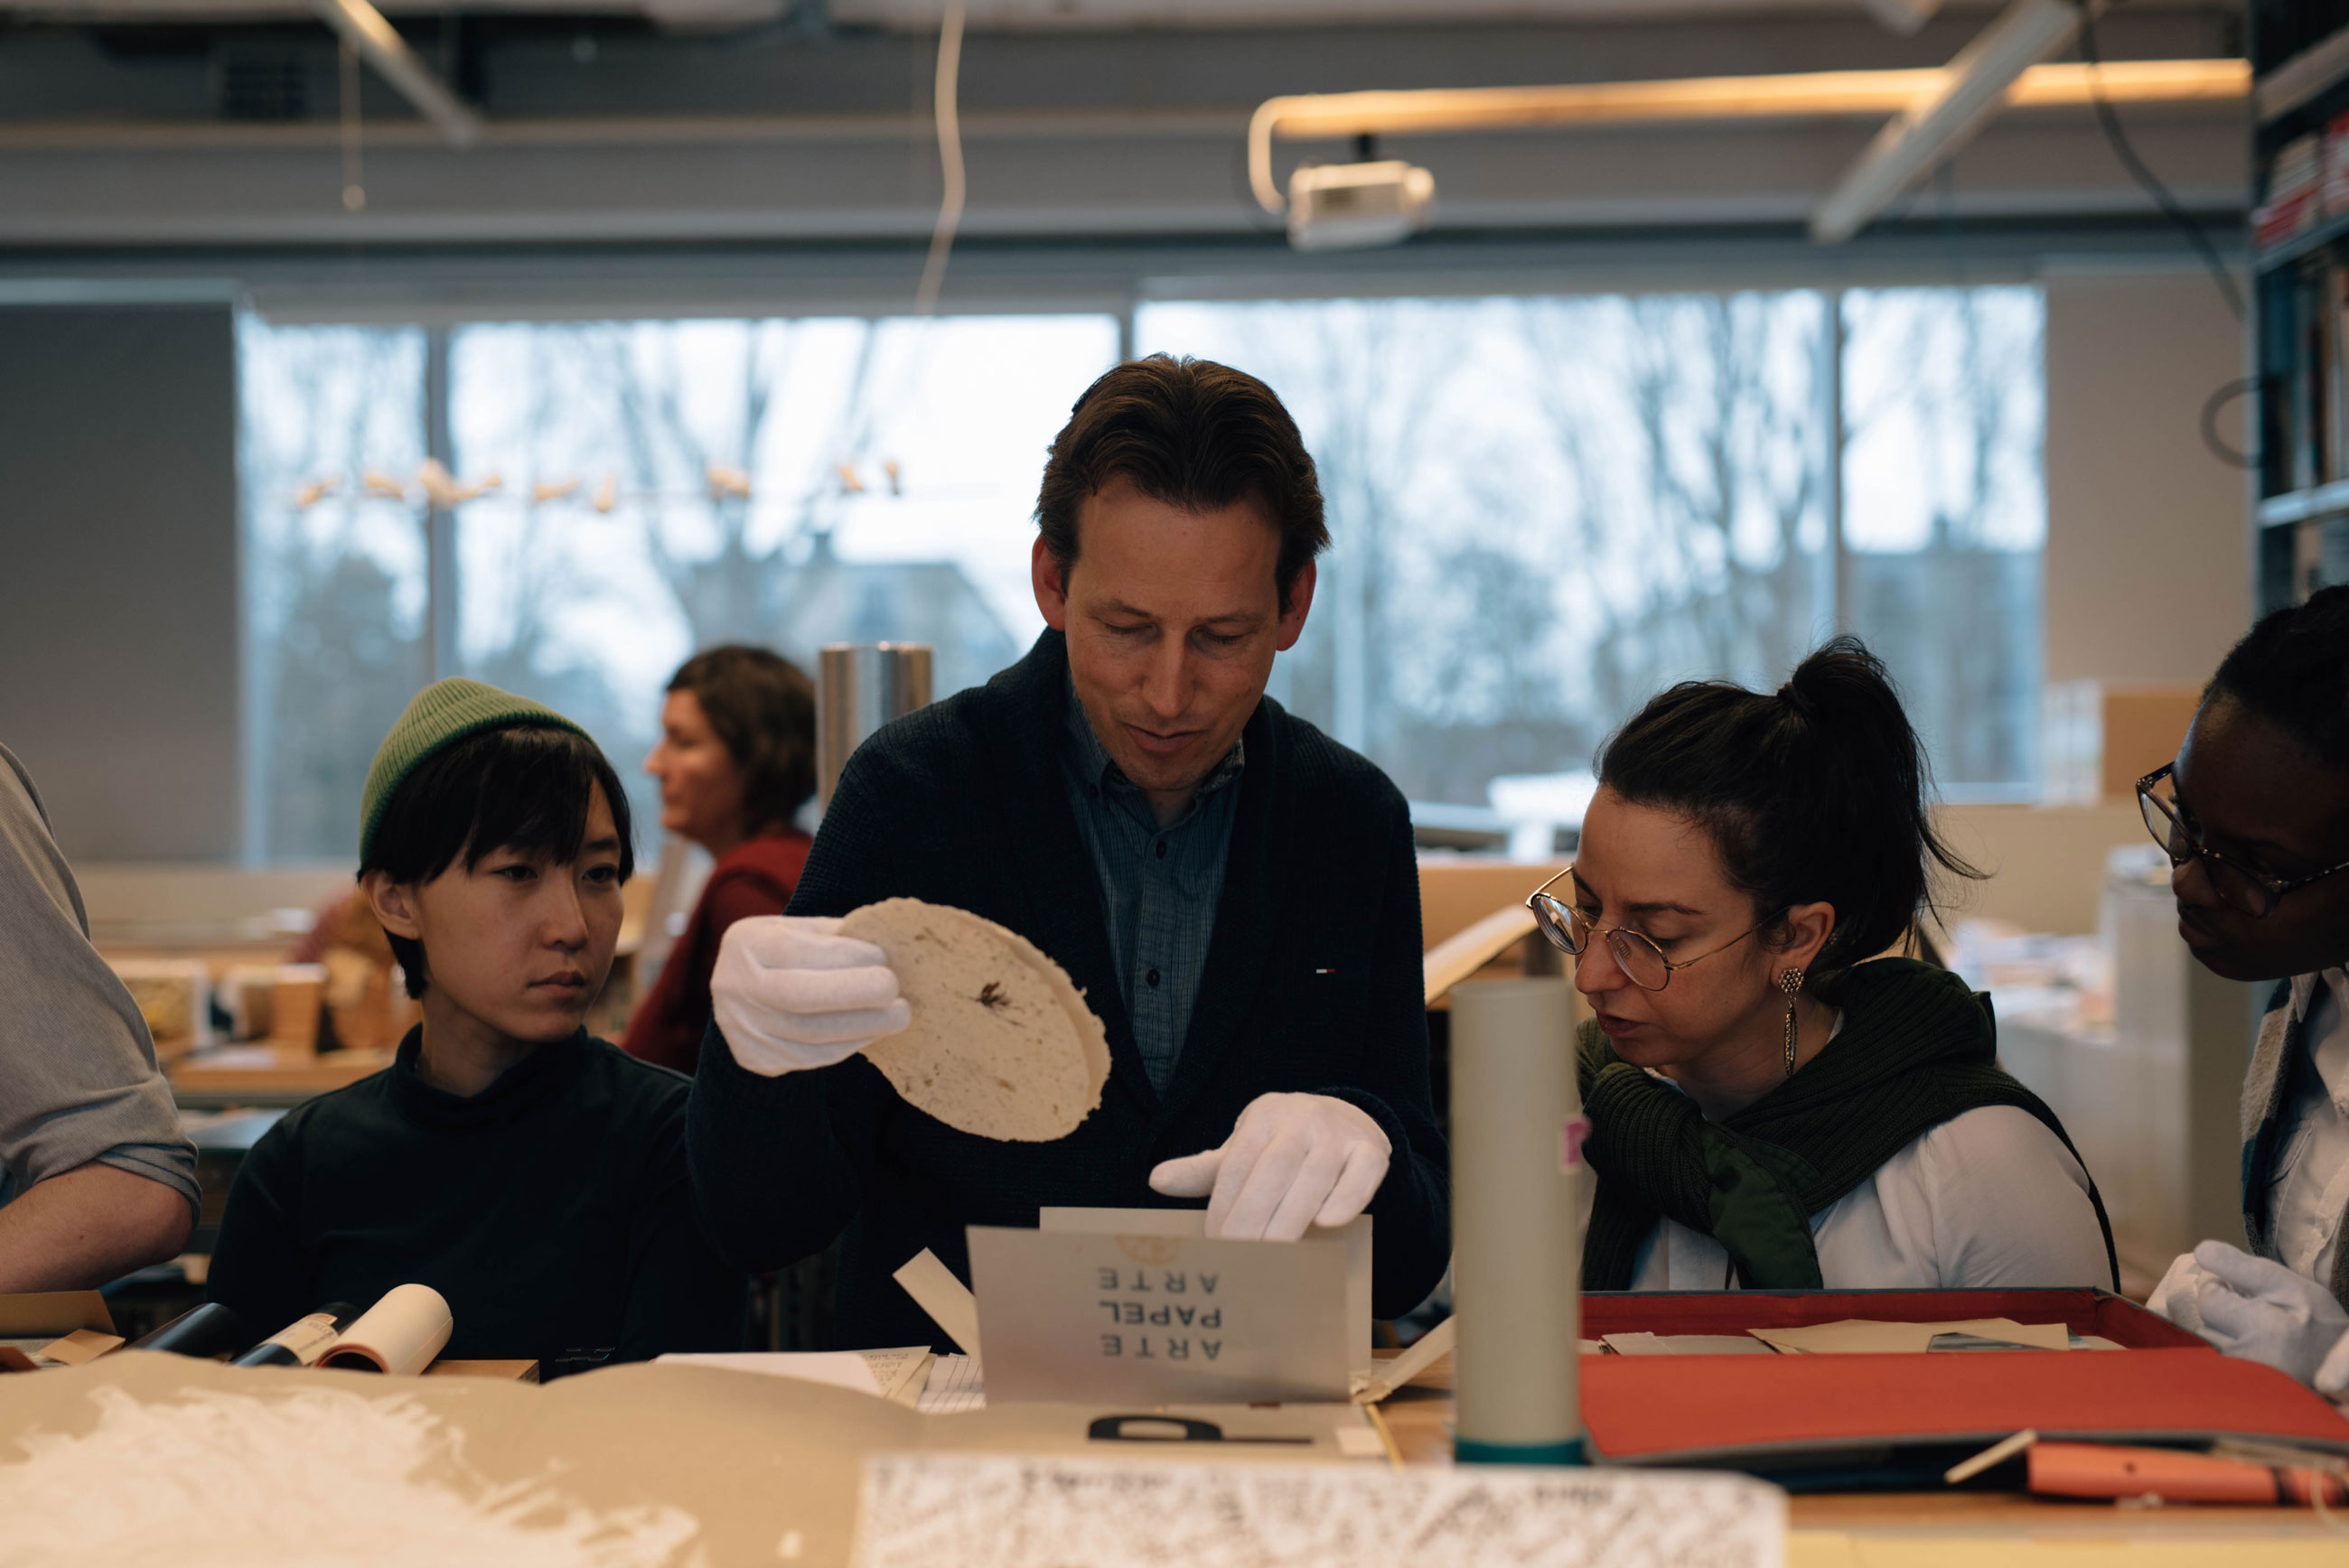 Artist Aram Lee, archaeologist Miguel John Versluys, writer Tamar Shafrir & curator Aude Mgba, part of the project Landscape with Bear, curated by the De Appel Curatorial Programme.